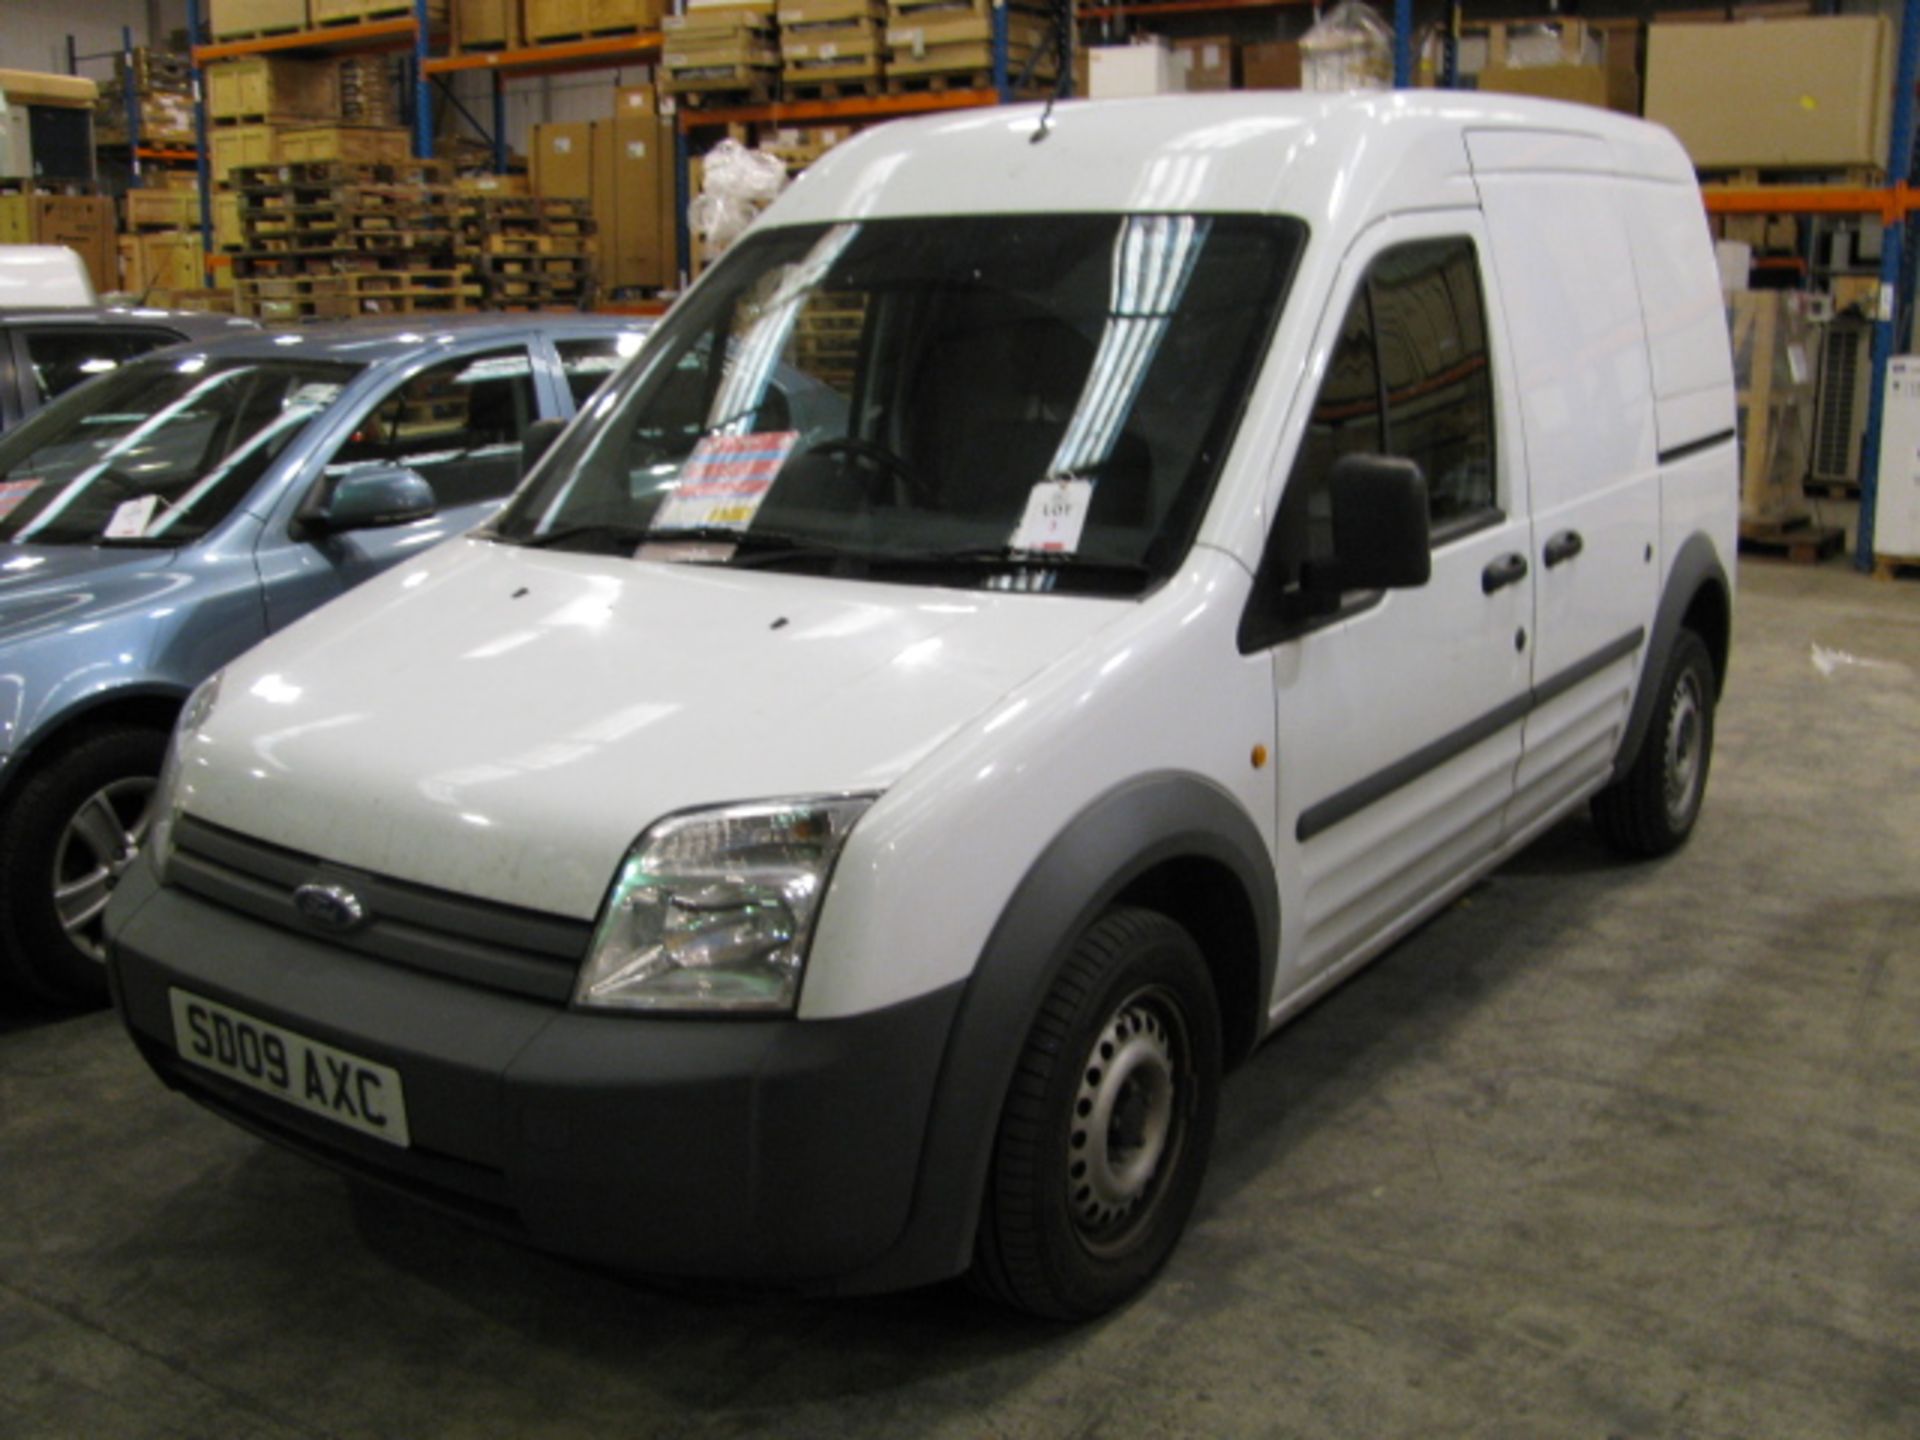 Ford Transit Connect 90T 230L reg SD09 AXC miles 68,427 - Image 2 of 4